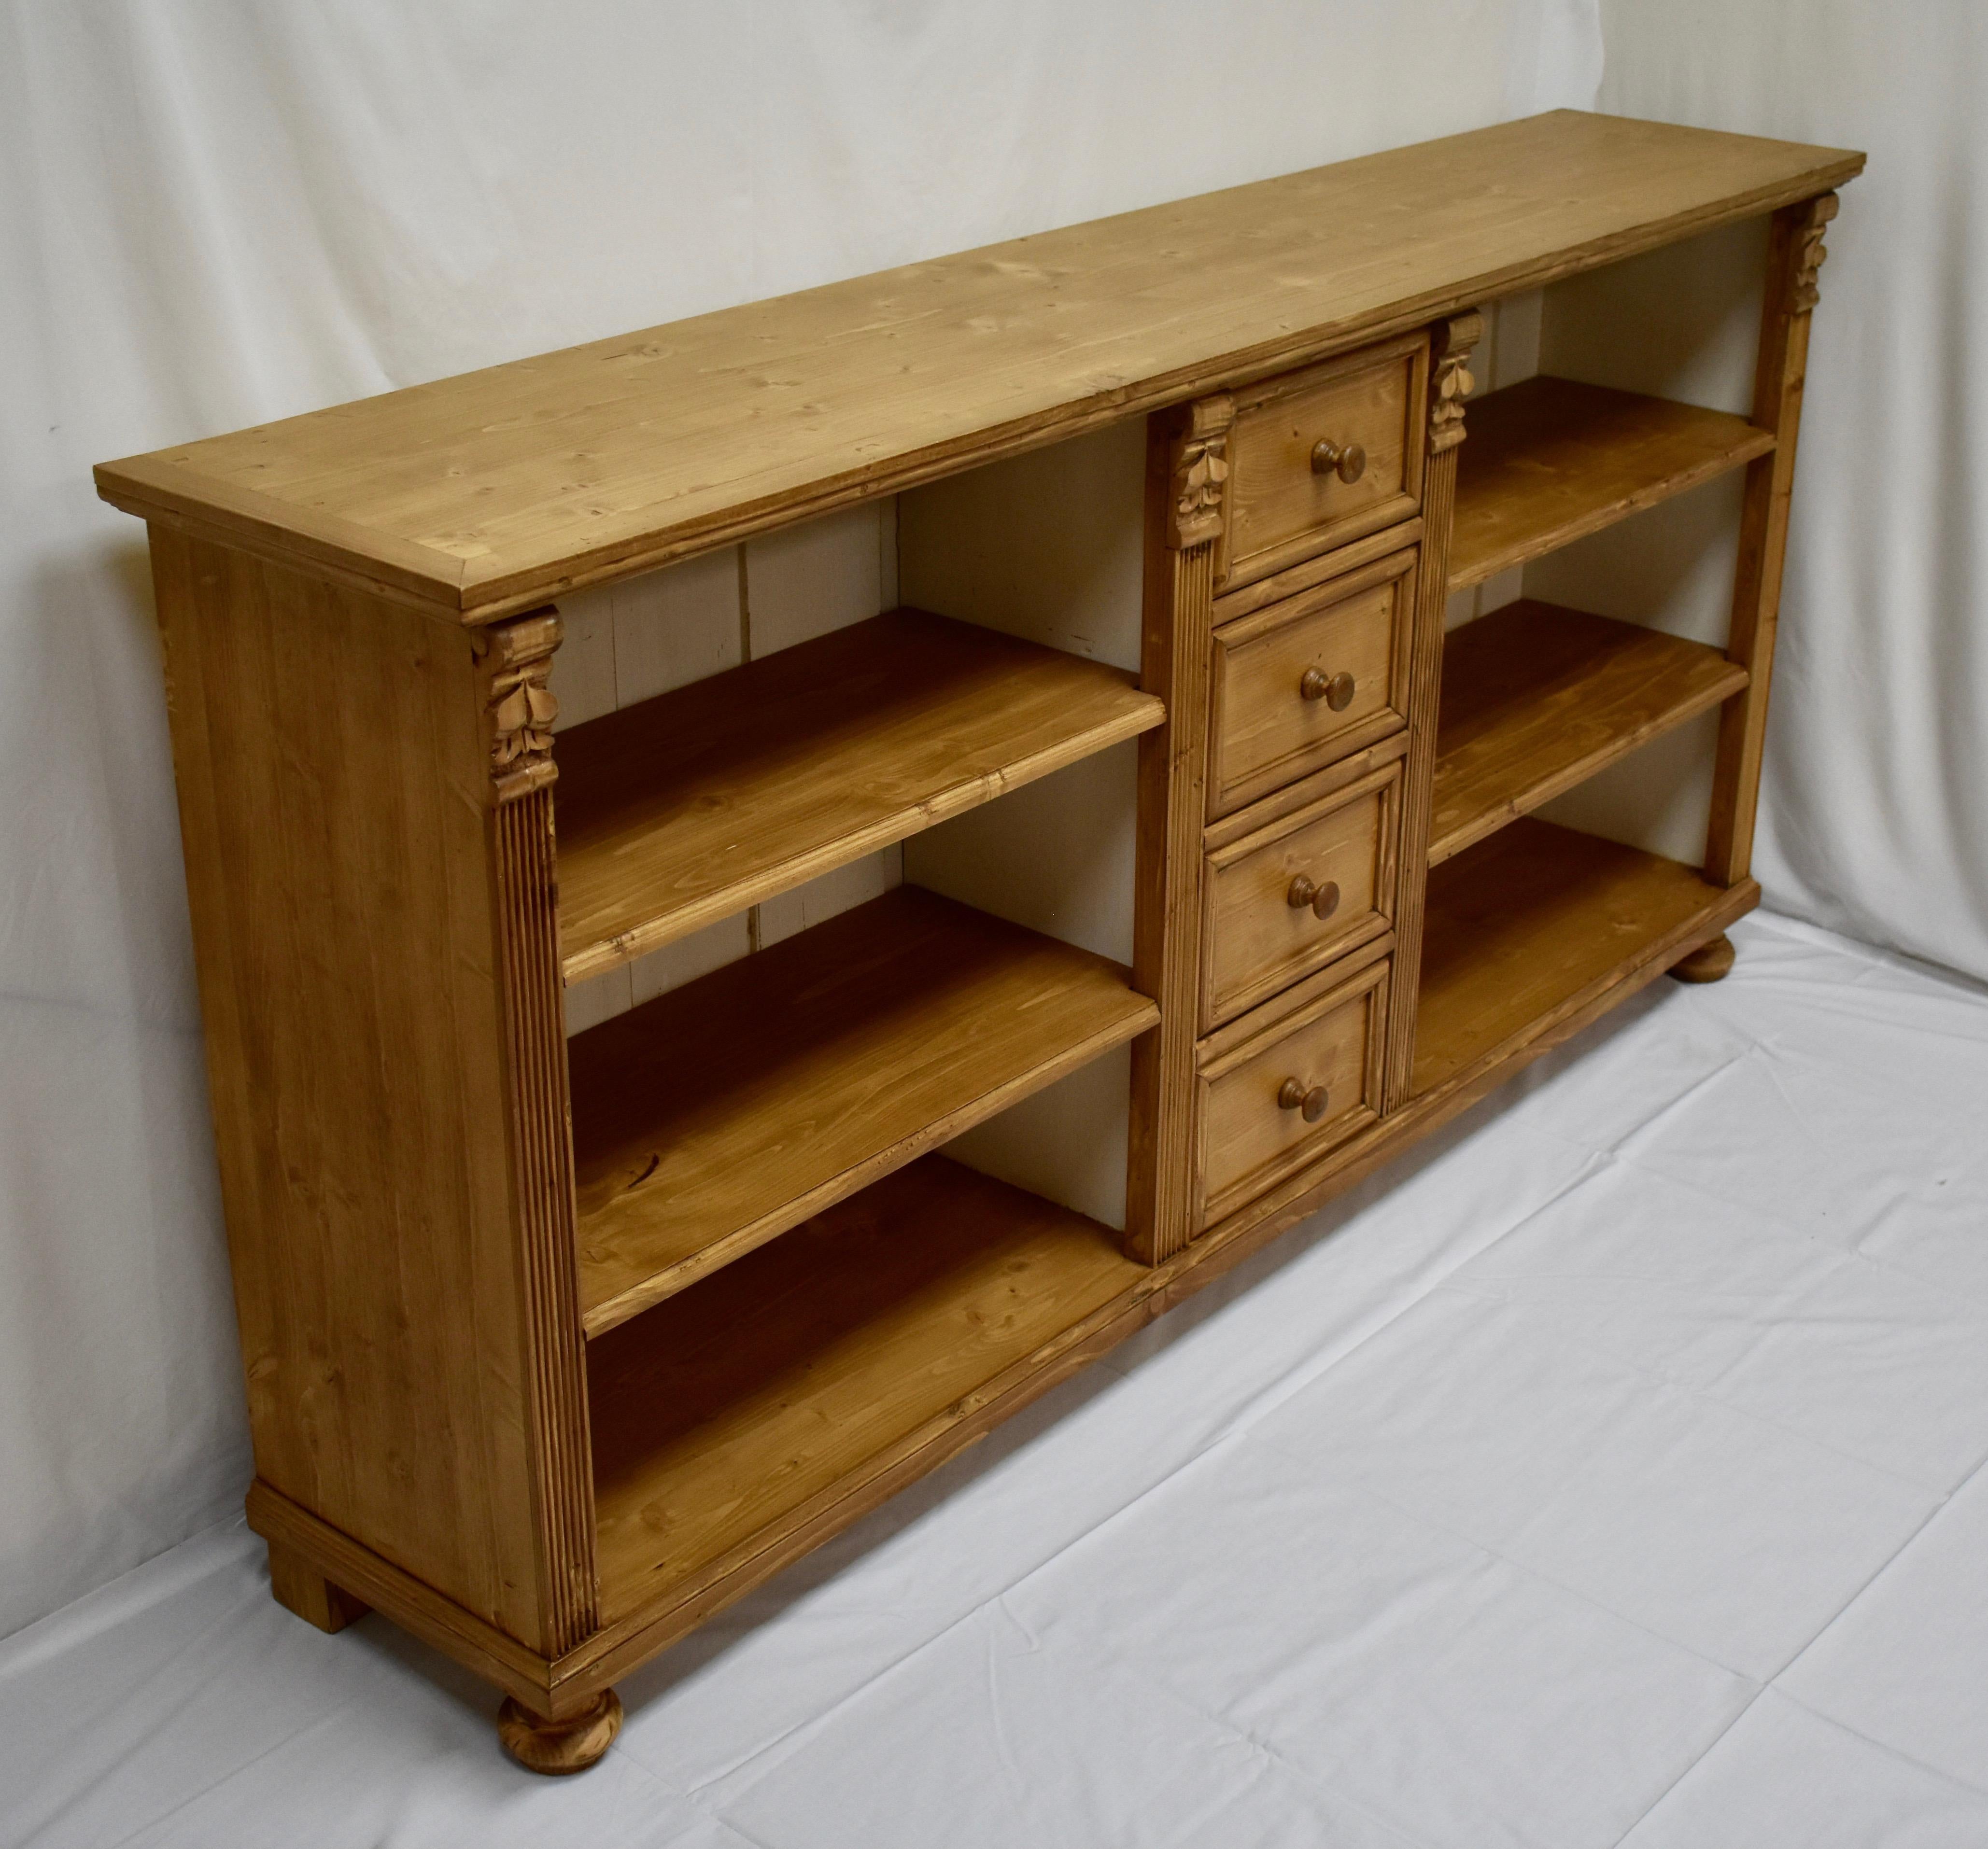 Hungarian Long Pine Bookcase with Four Drawers